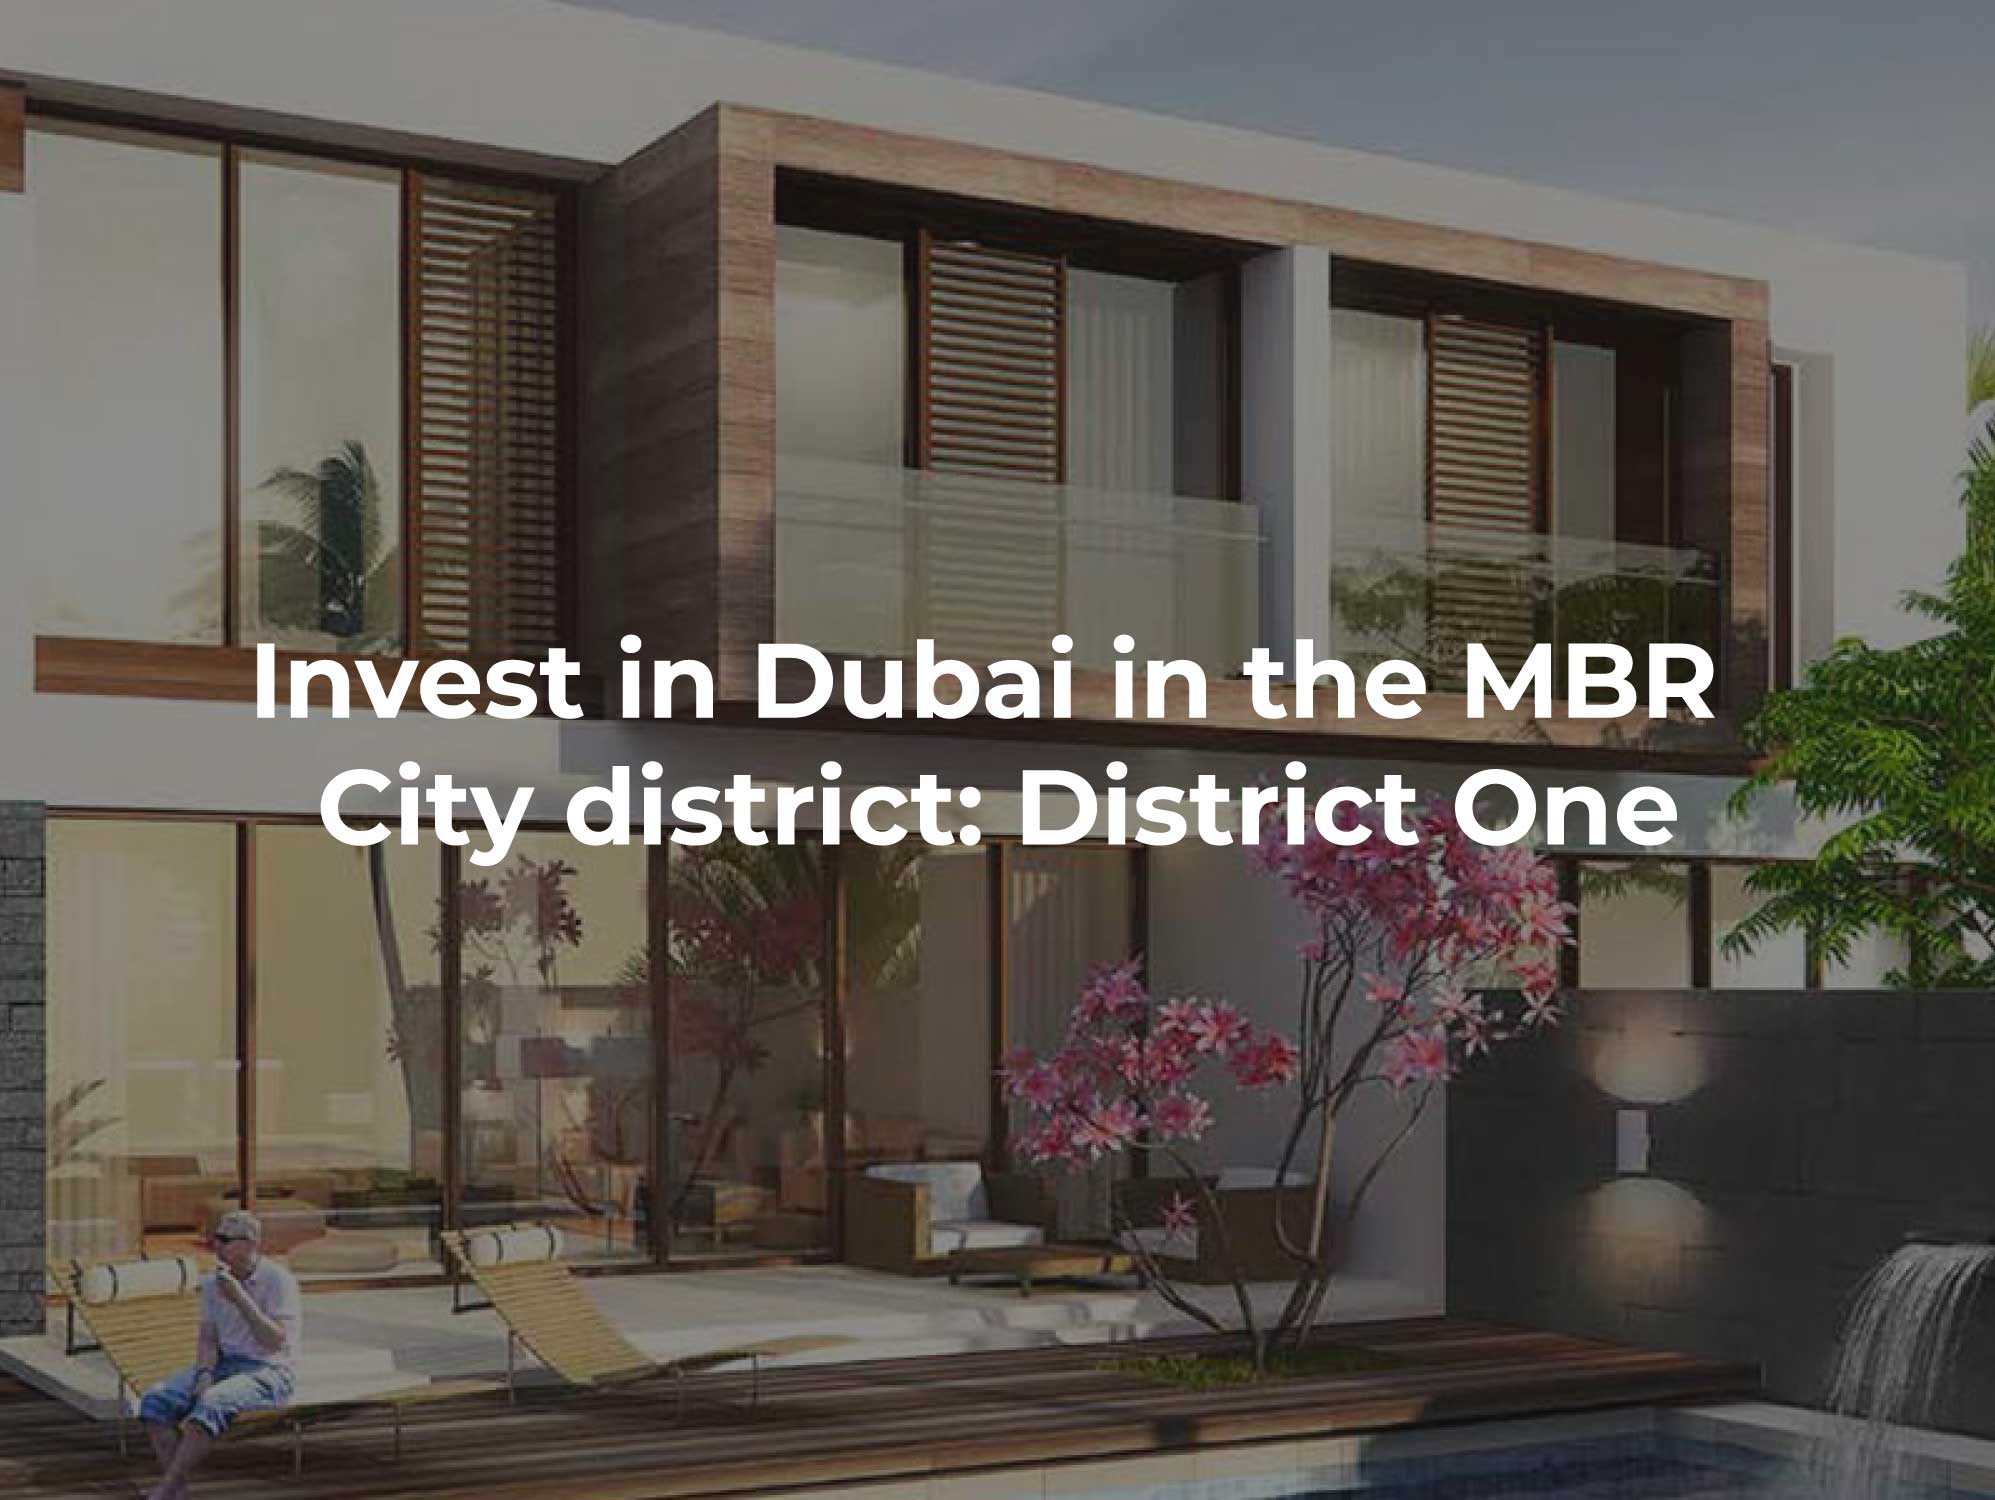 Invest in Dubai in the MBR City district: District One